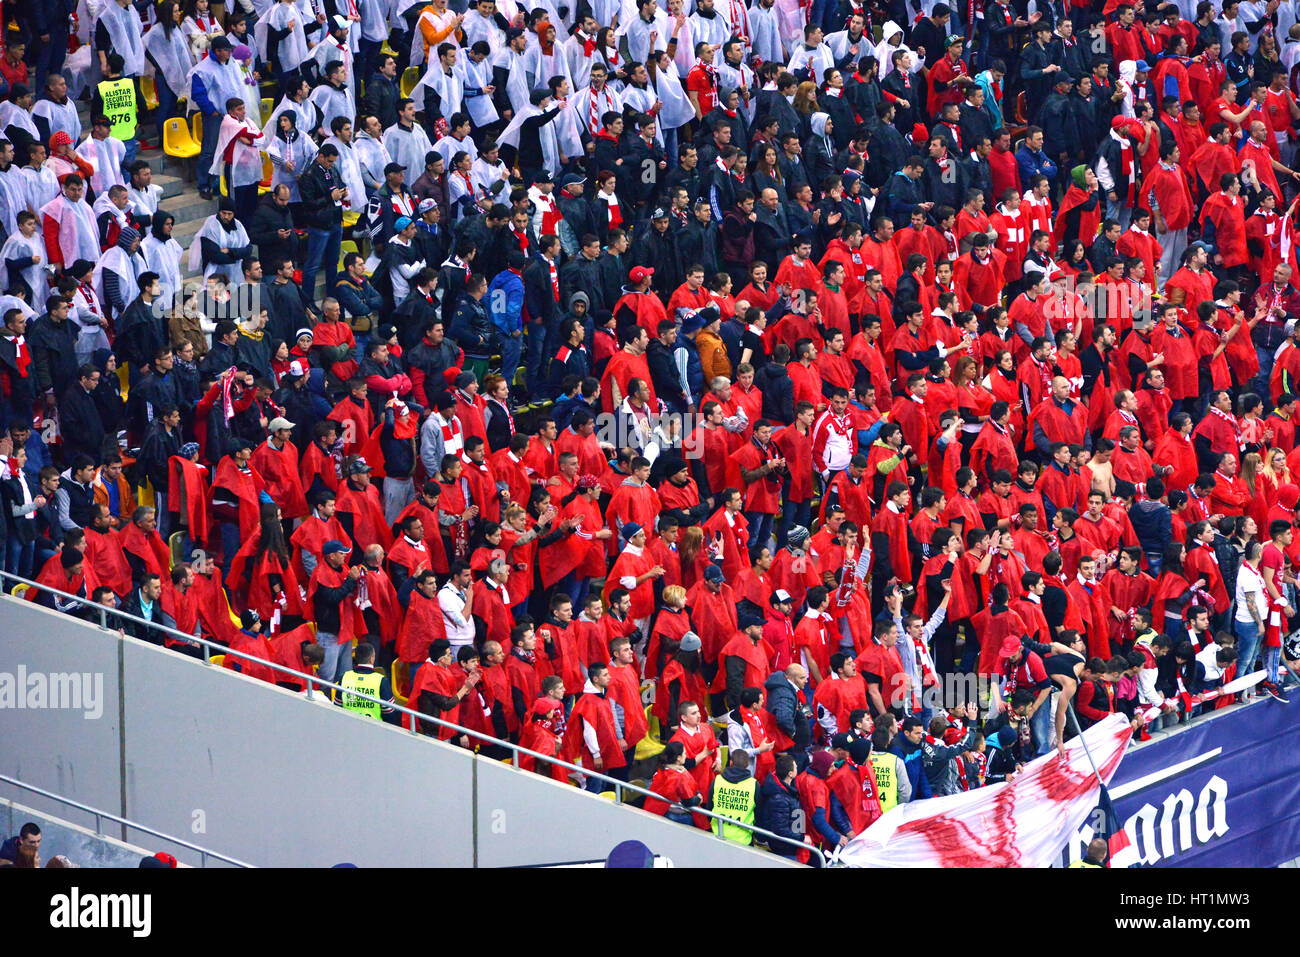 BUCHAREST - APRIL 17: Football fans of Dinamo Bucharest during a match against Steaua Bucharest, in the National Arena stadium, final score: 1-1. On A Stock Photo